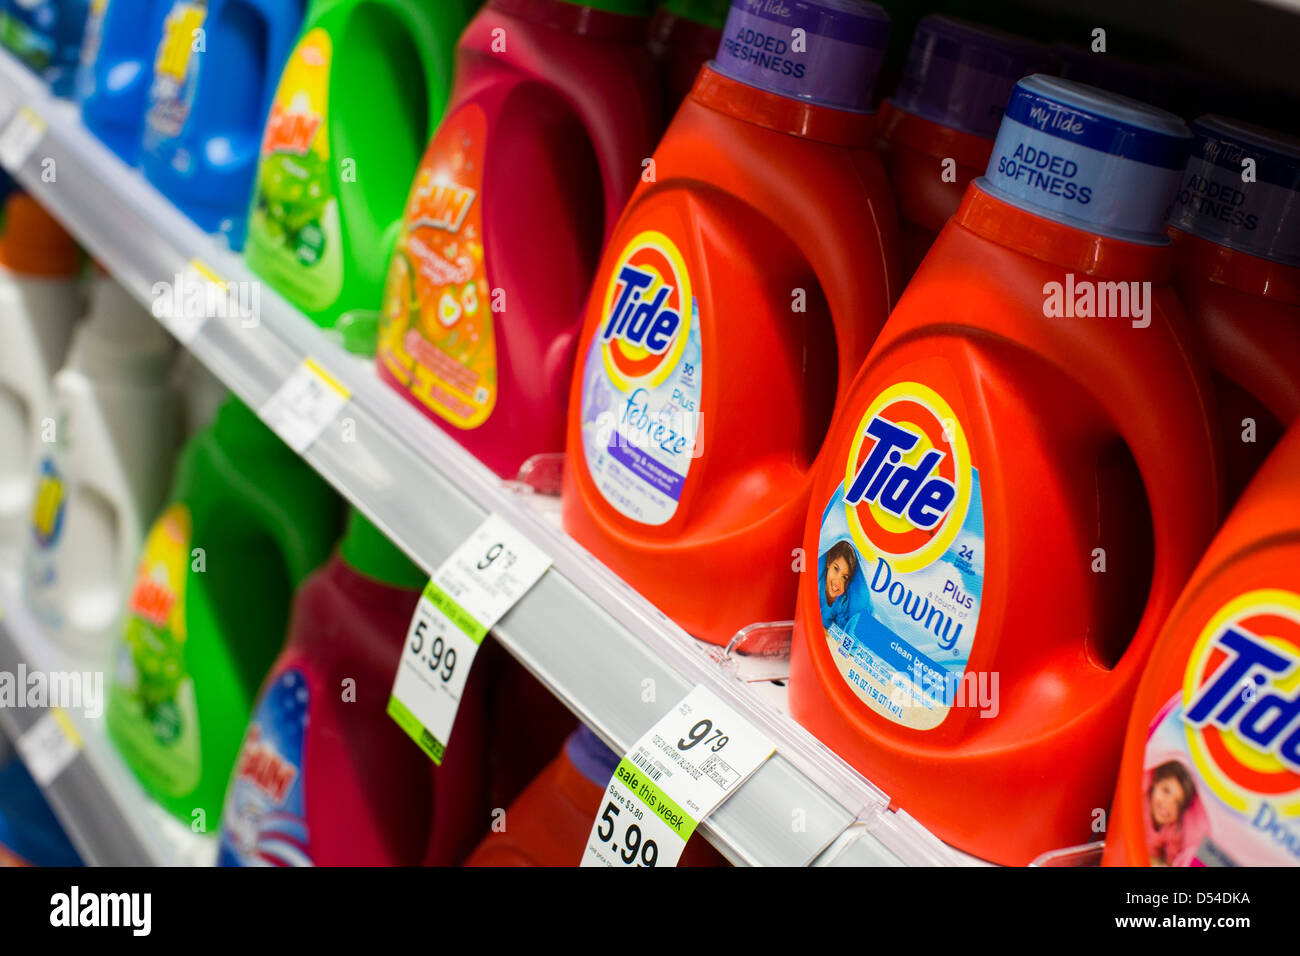 Tide laundry detergent on display at a Walgreens Flagship store.  Stock Photo